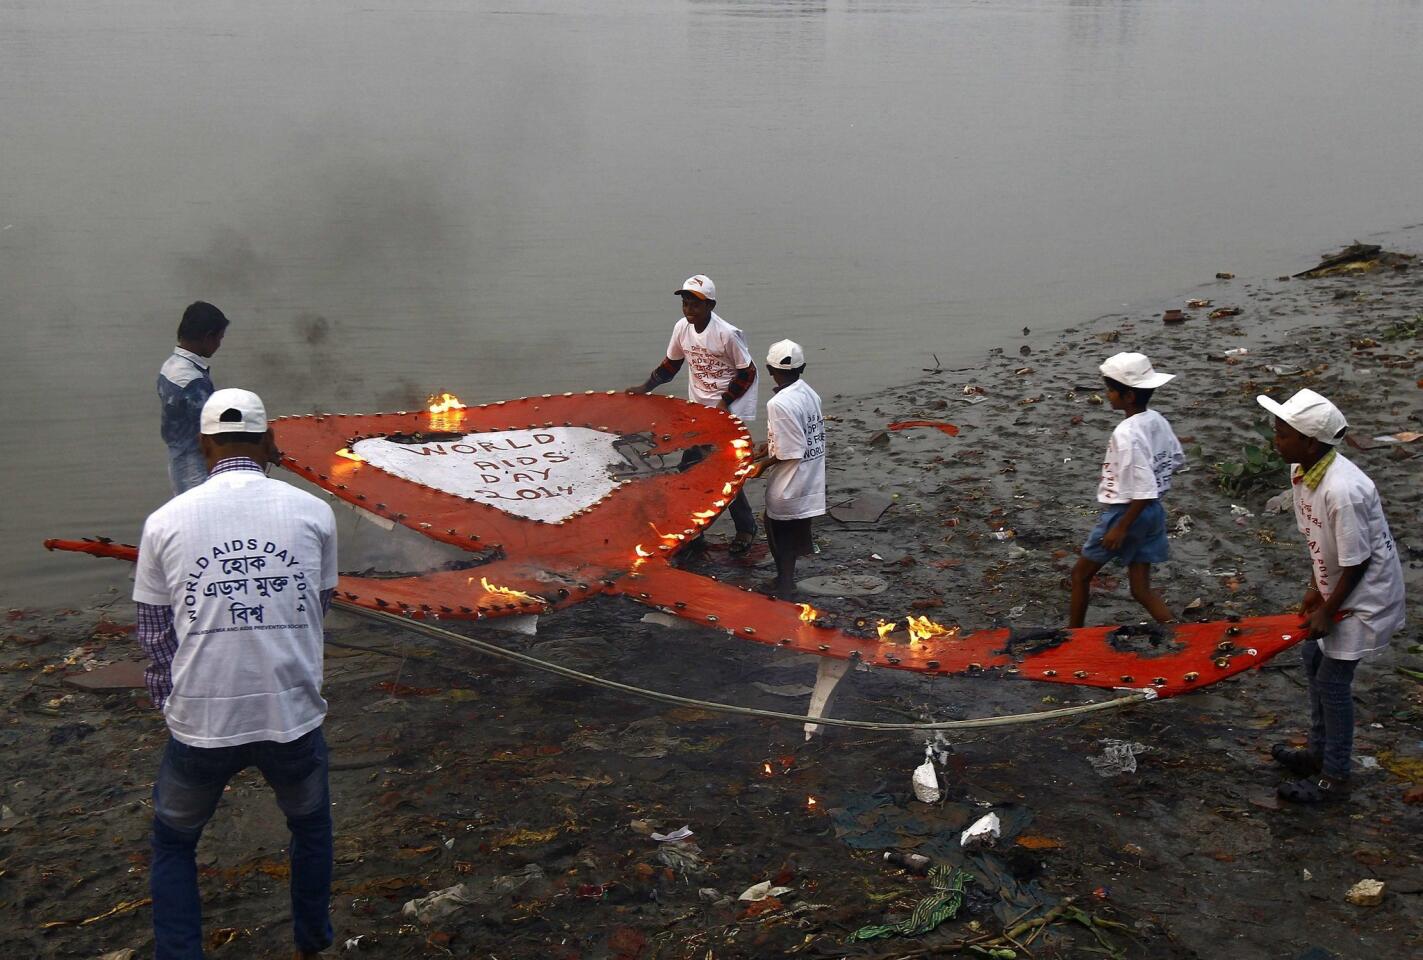 Activists from an NGO carry a giant red ribbon lit with oil lamps before releasing it in the waters of the river Ganges during an HIV/AIDS awareness campaign to mark World AIDS Day in Kolkata